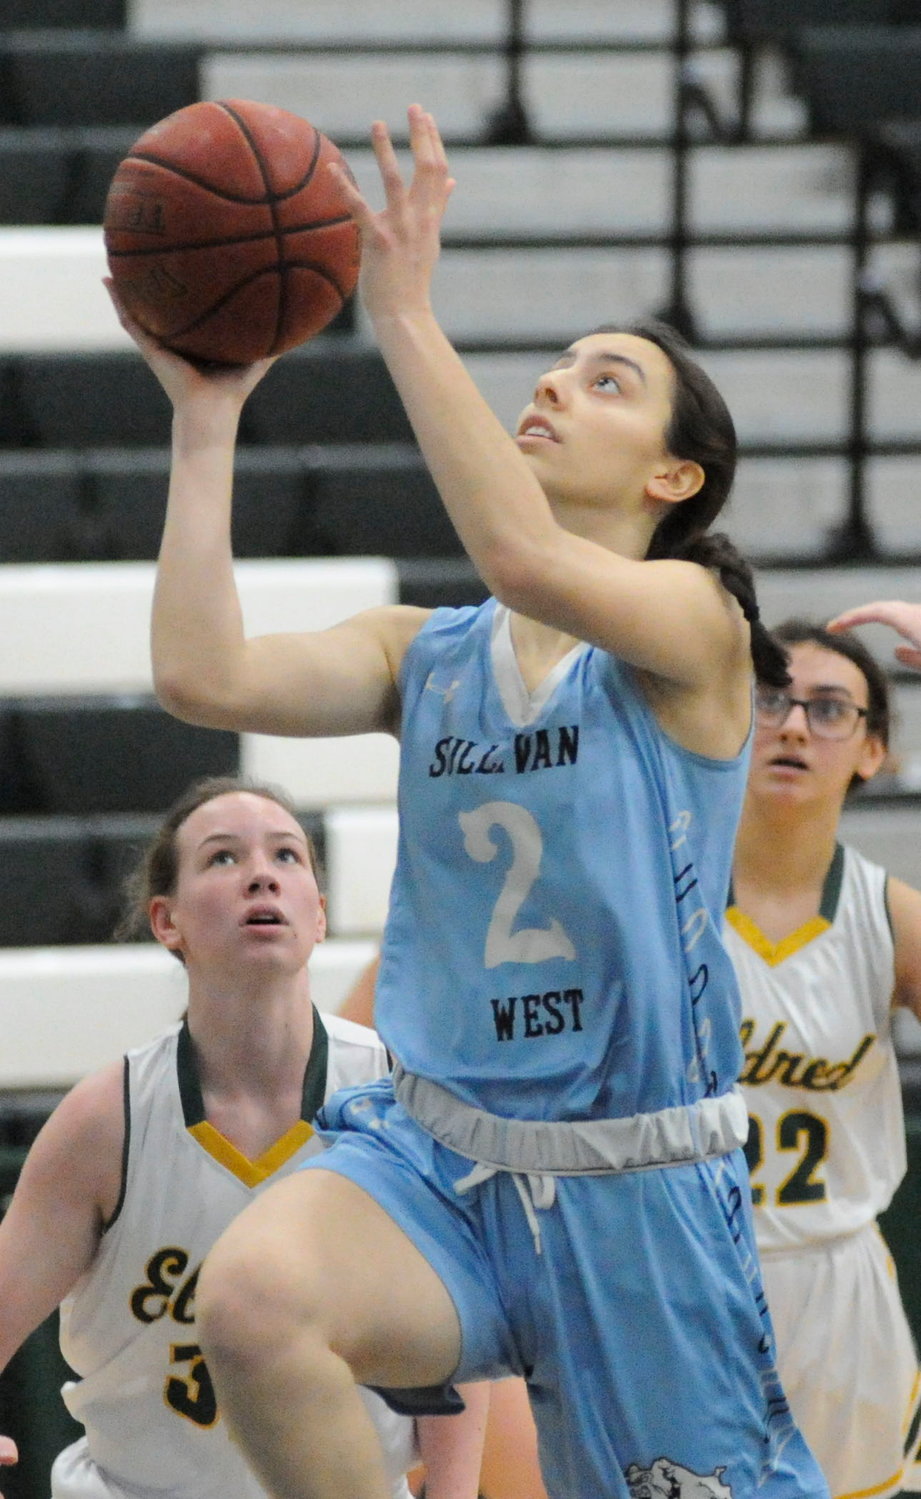 Headed for 2. Sullivan West’s Viola Shami scored 8 points, including a three-pointer.